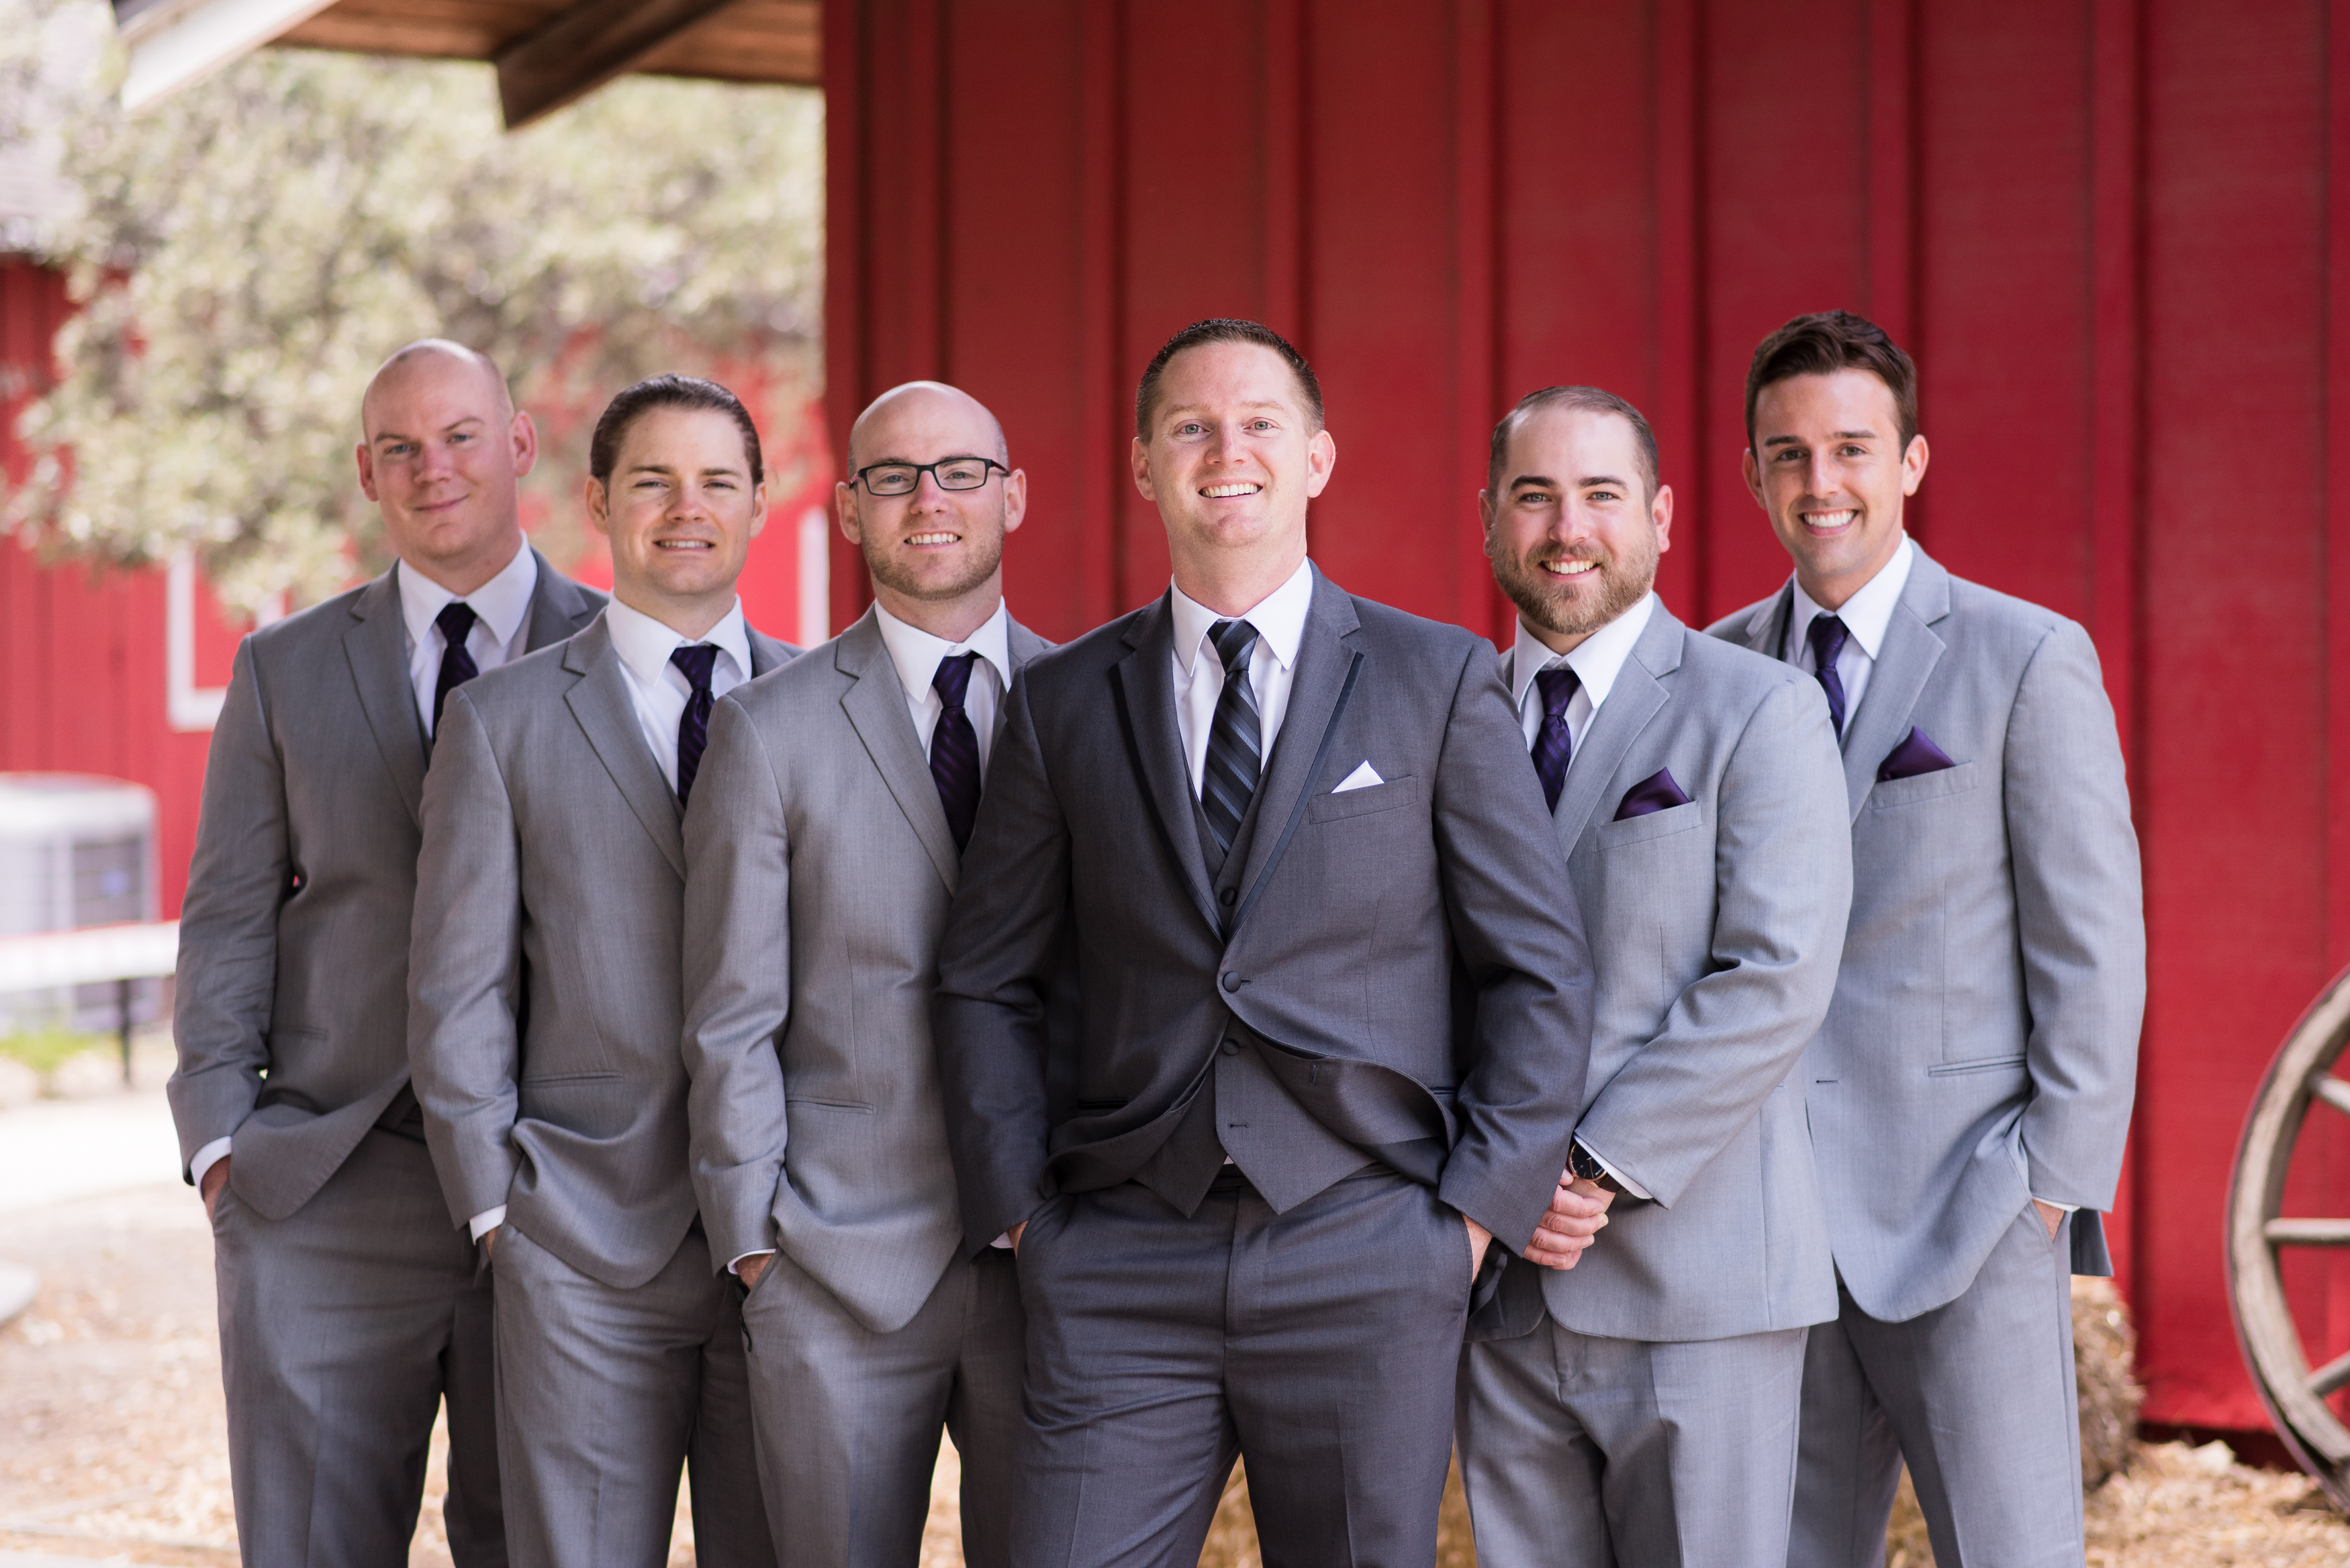 Groomsmen in grey suits standing together with hands in pockets 